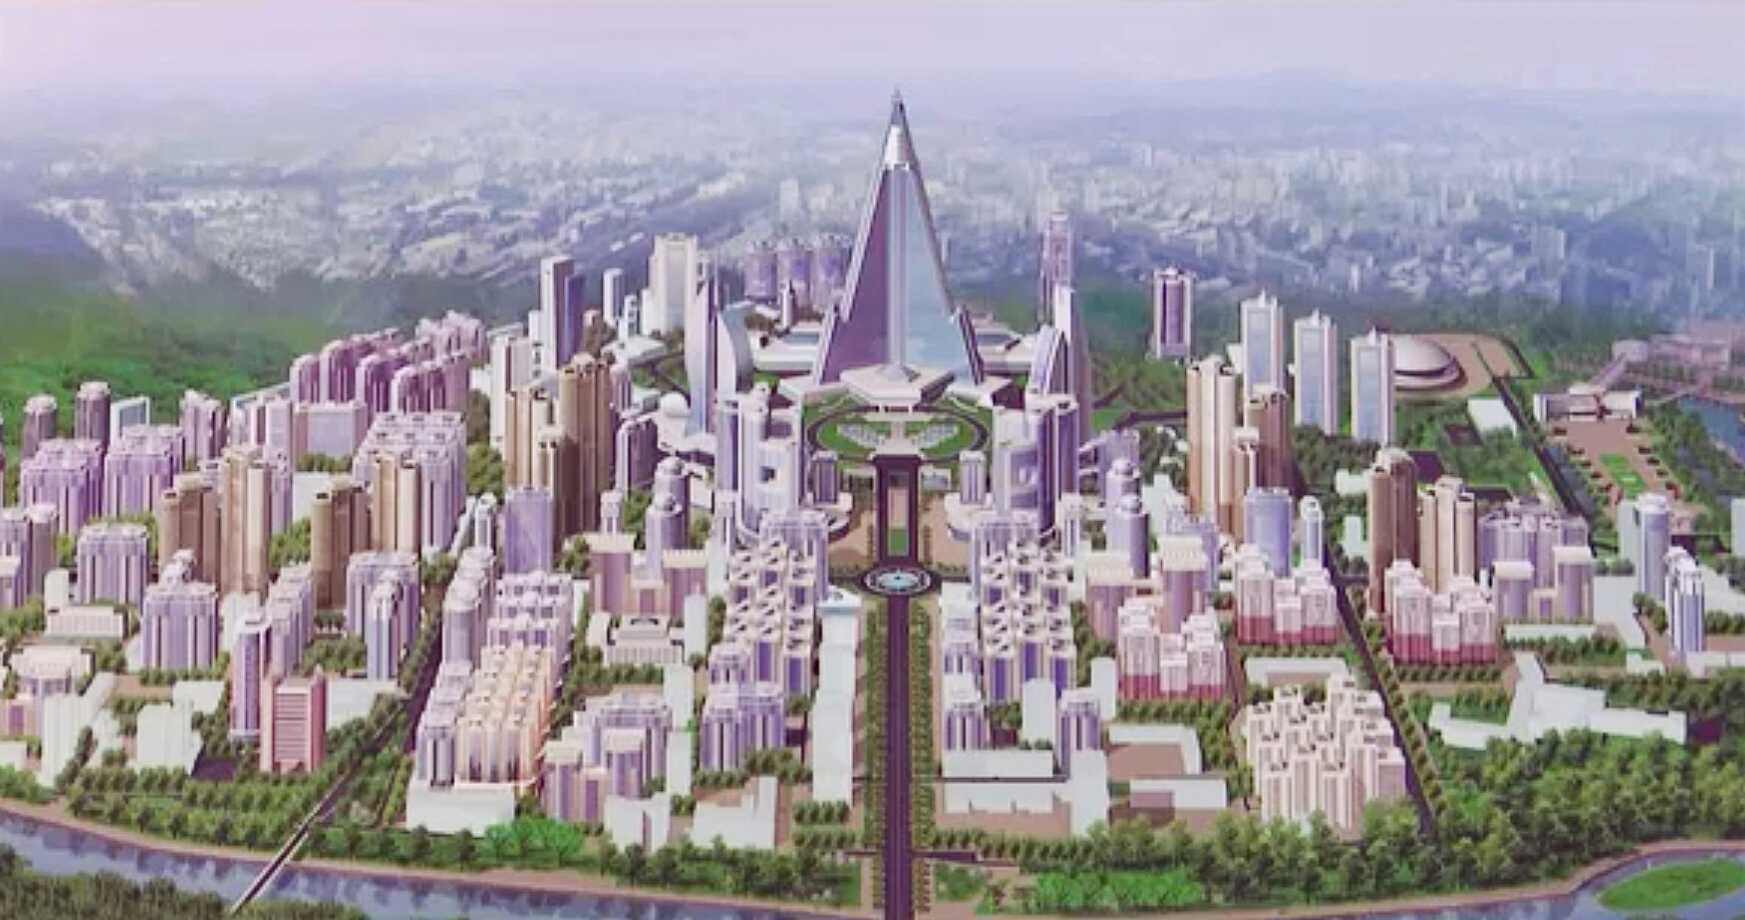 KCTV reveals largescale plans for district surrounding iconic Ryugyong